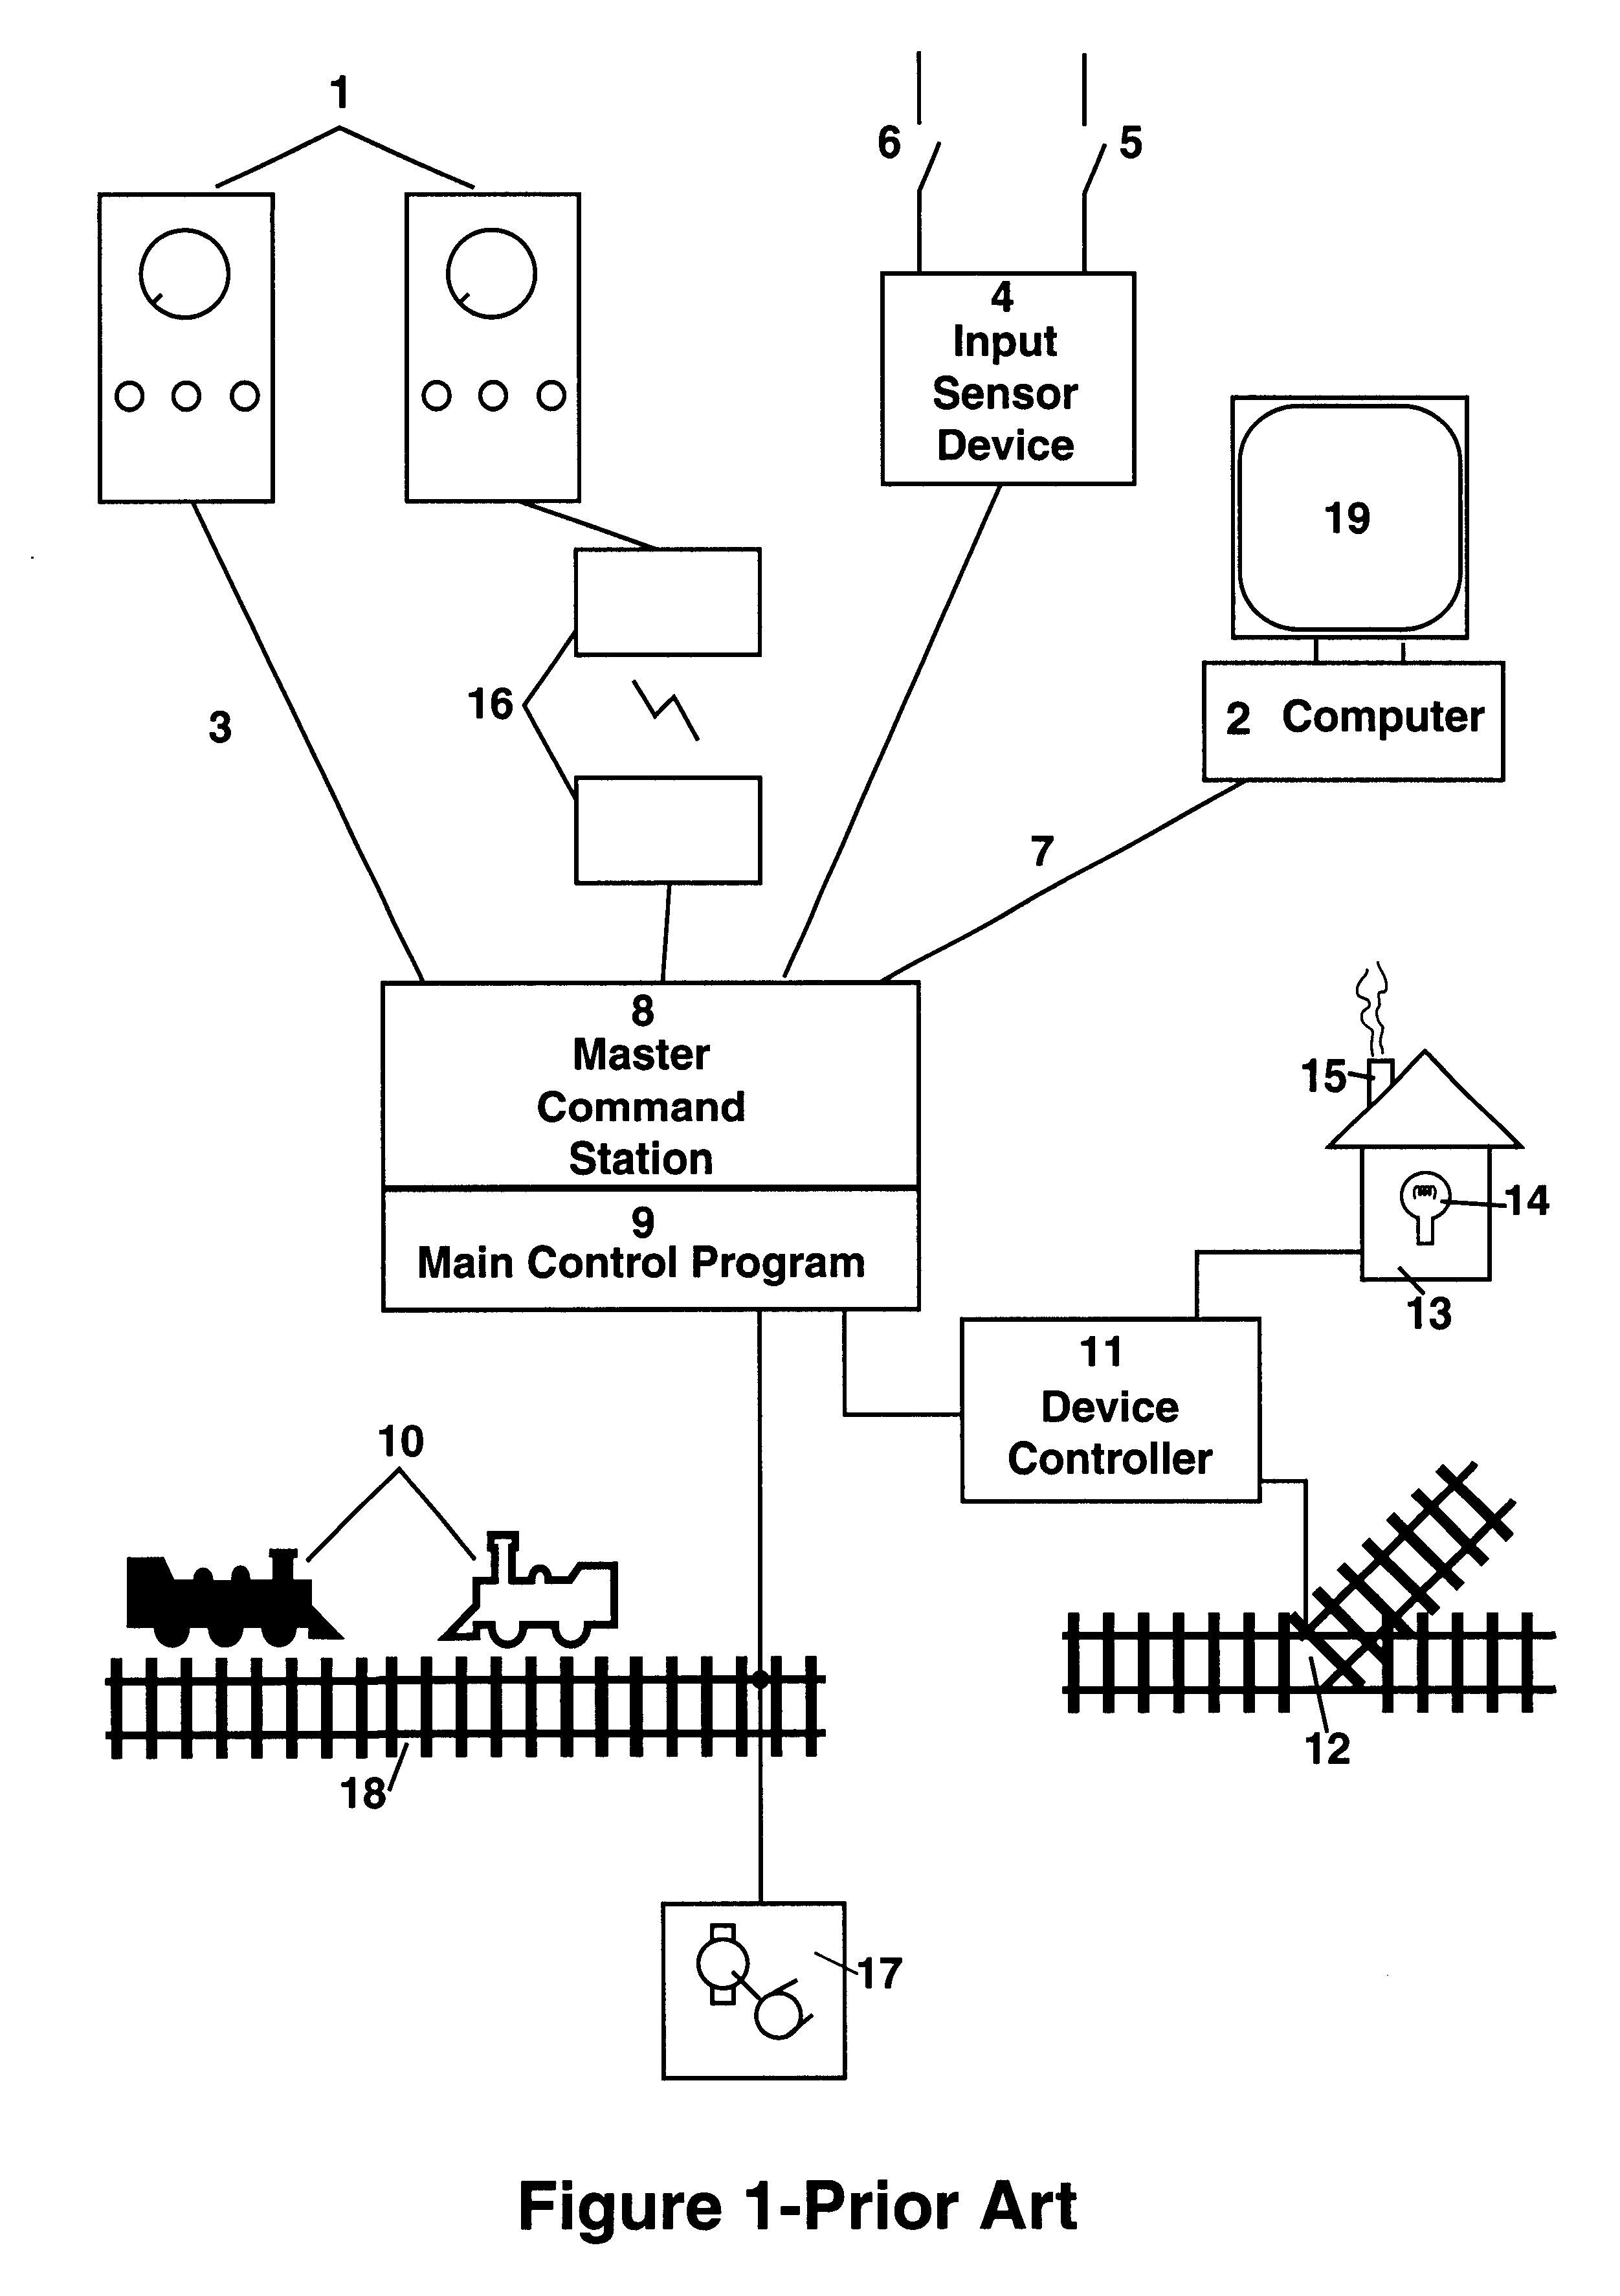 Attached logic module technique for control and maintenance in a distributed and networked control system